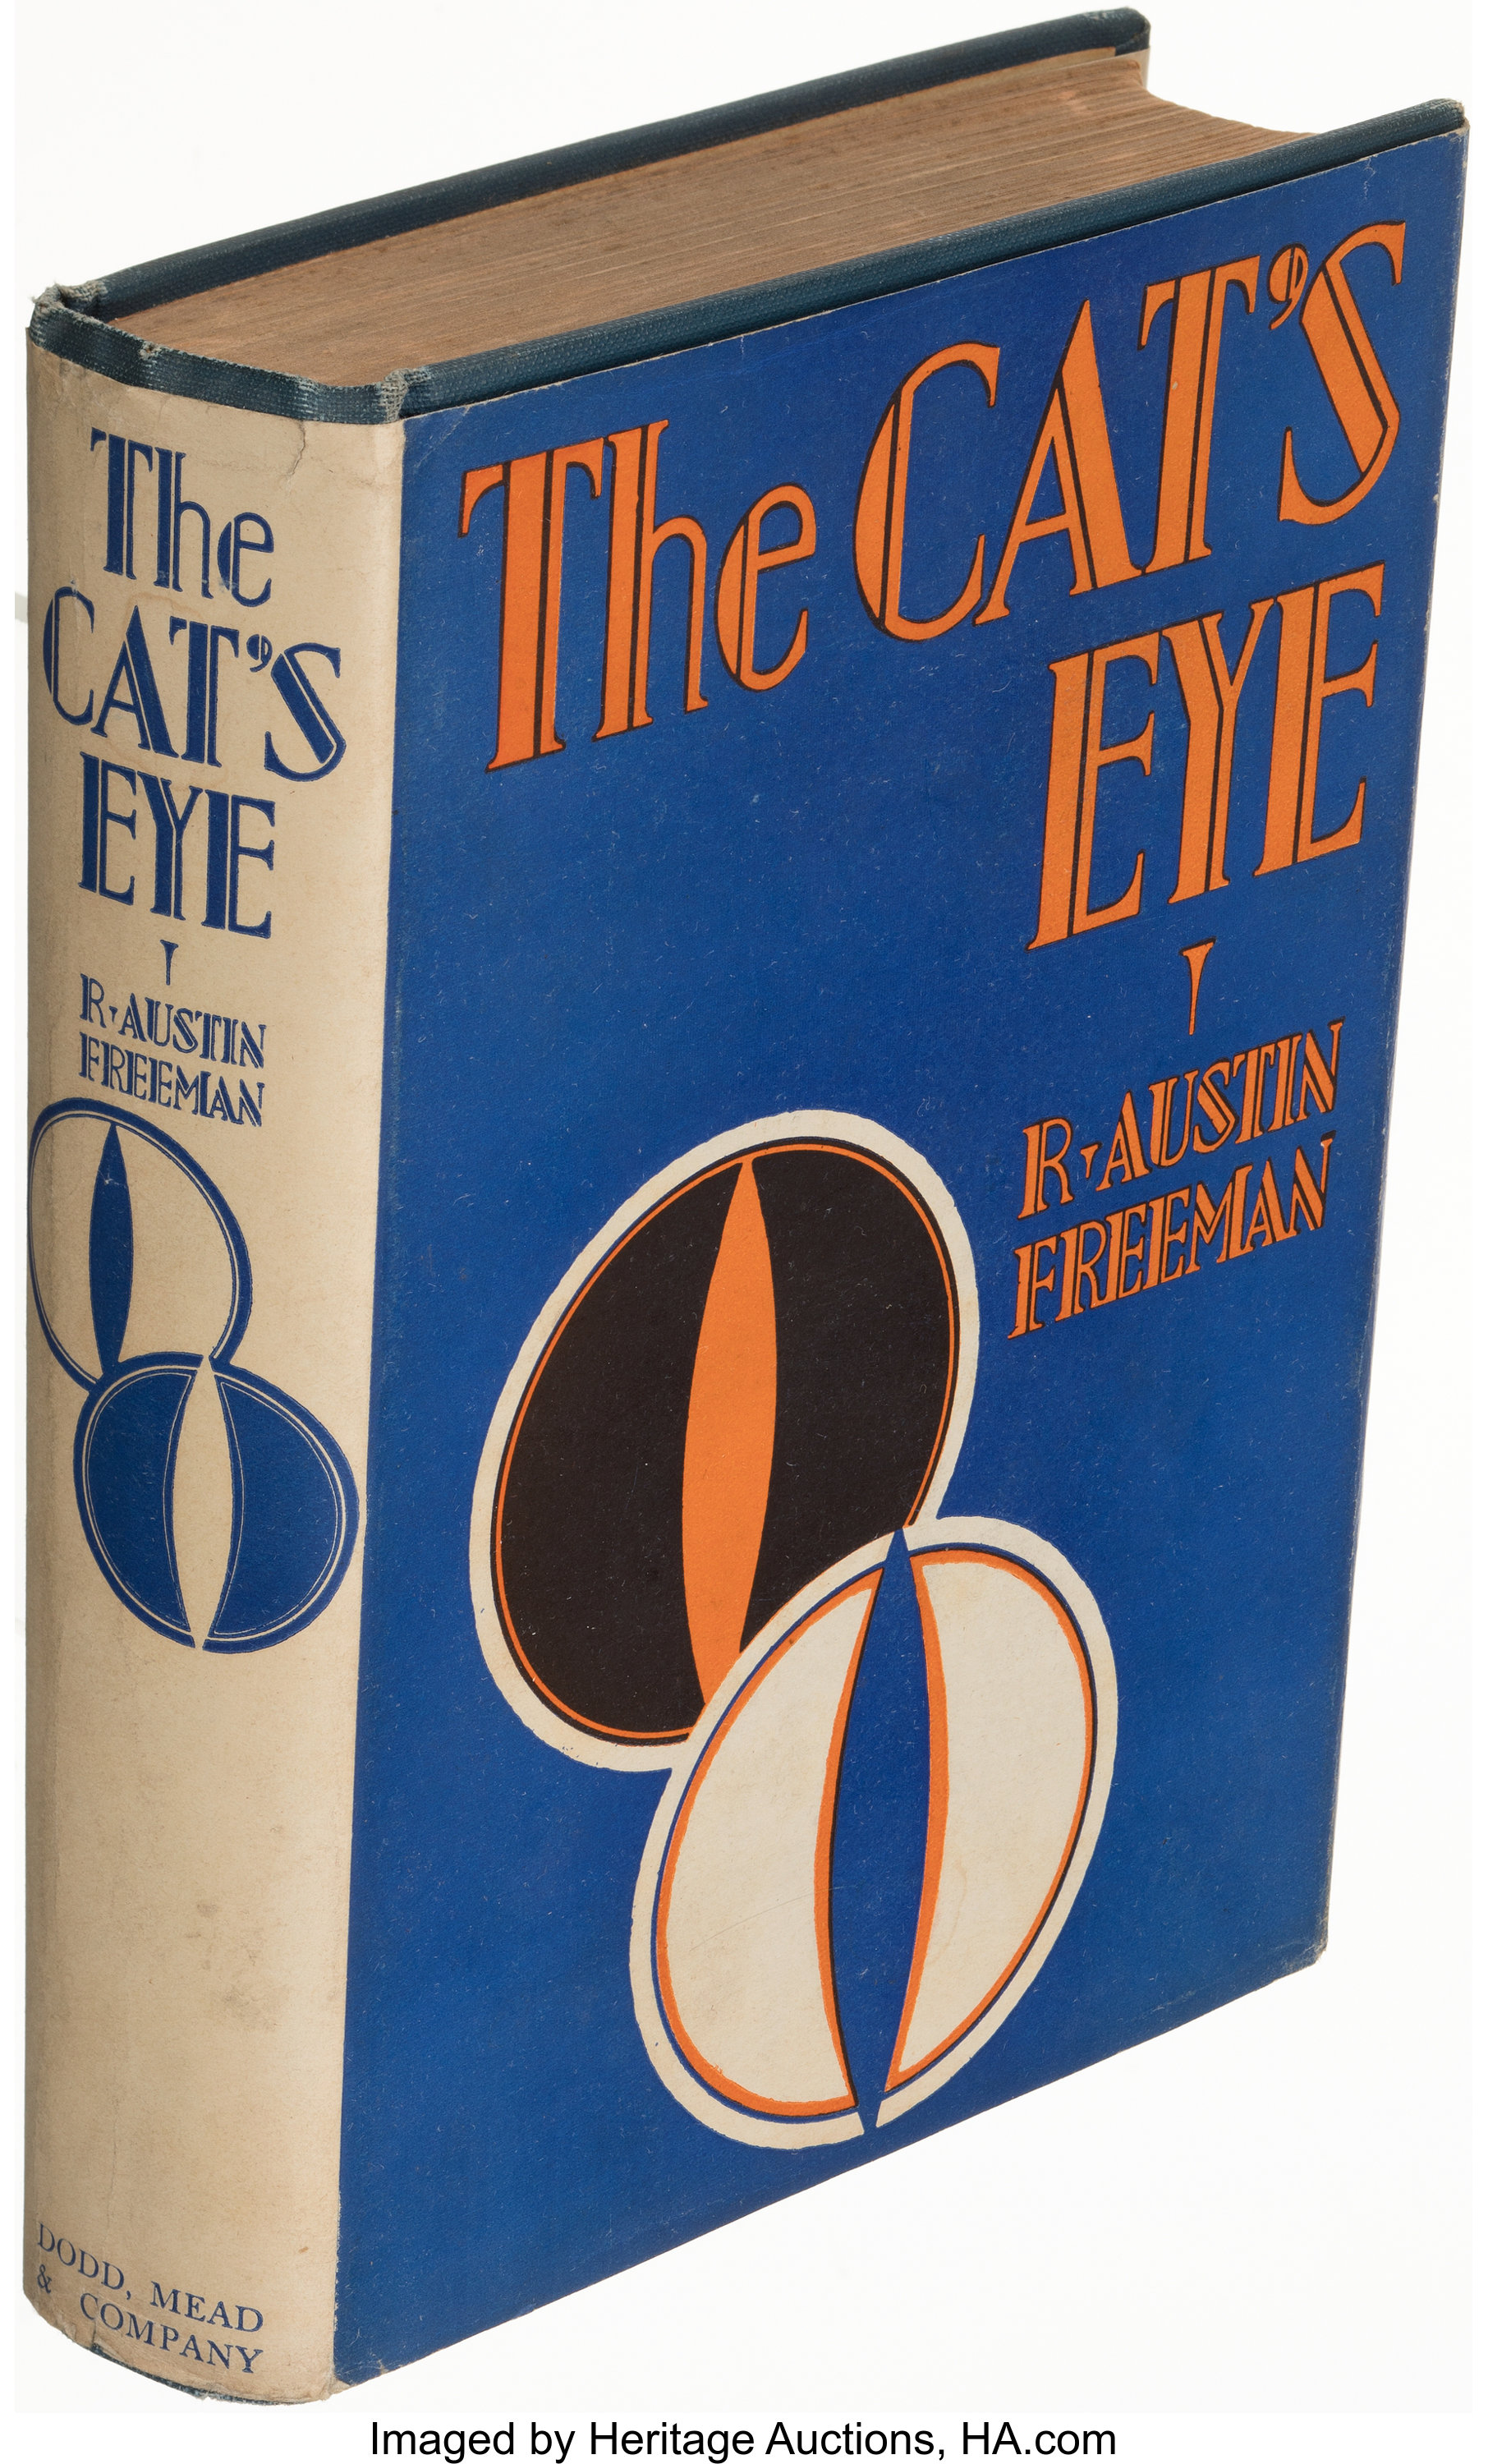 R. Austin Freeman. The Cat's Eye. New York: Dodd, Mead and Company, | Lot  #70337 | Heritage Auctions